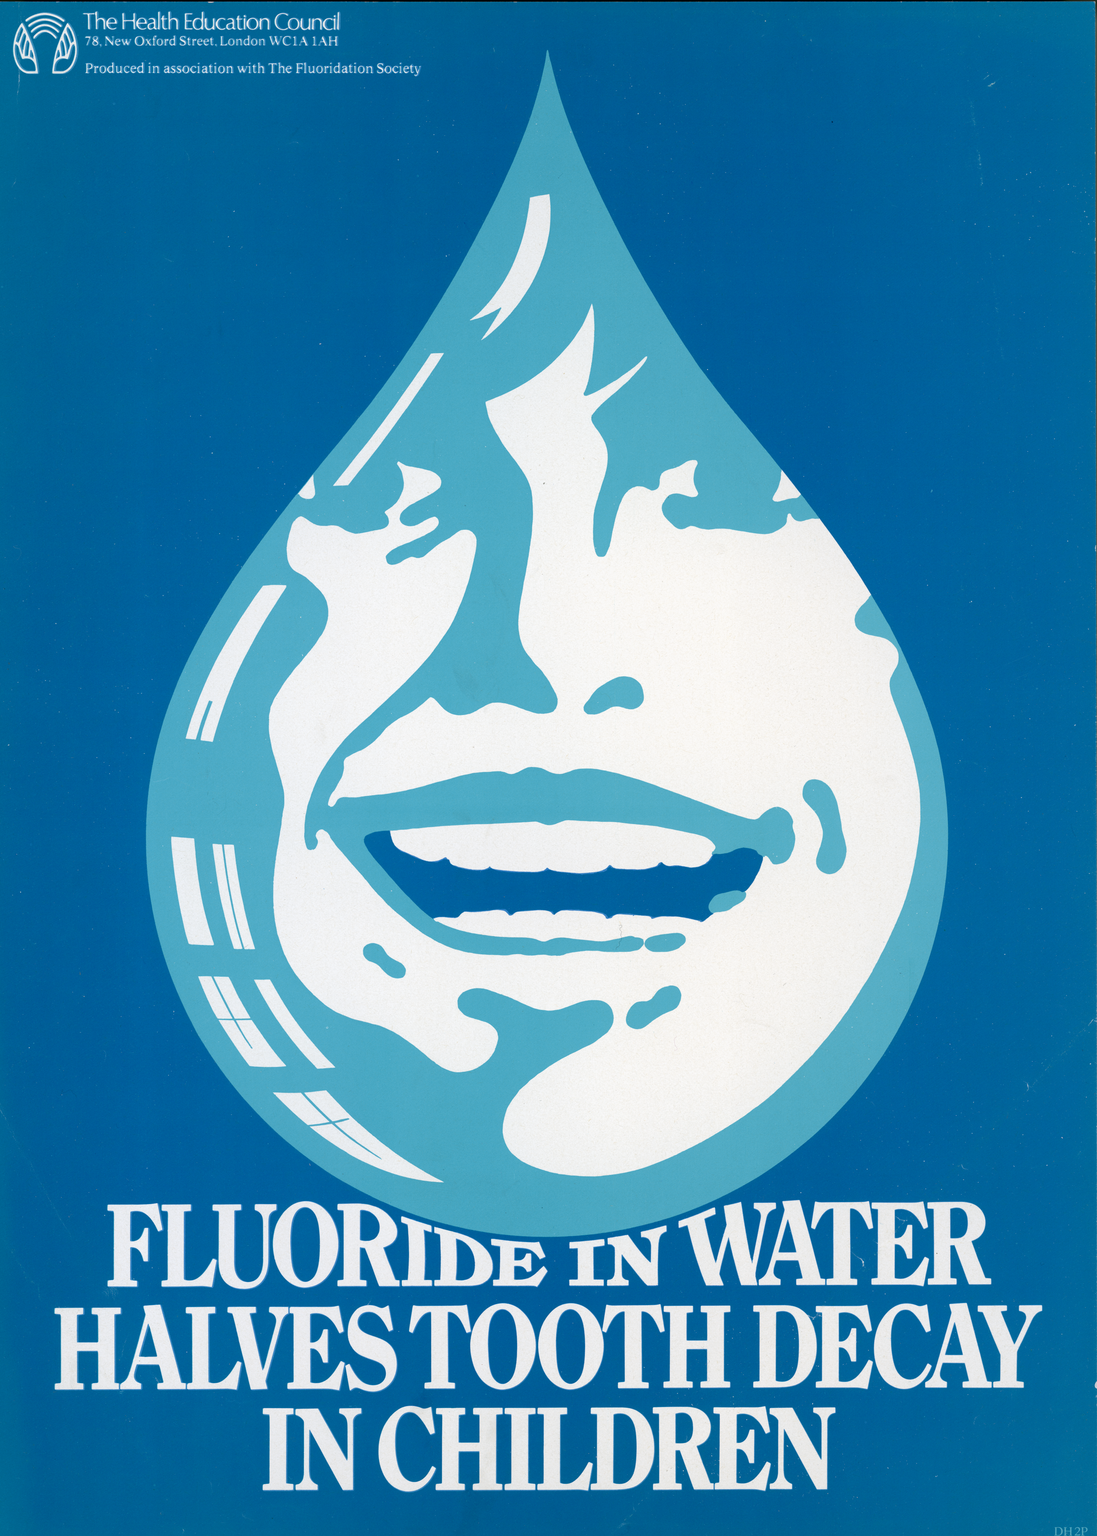 'Fluoride in water halves tooth decay in children', poster by the UK Health Education Council, 1970-1980. Credit: Health Education Authority